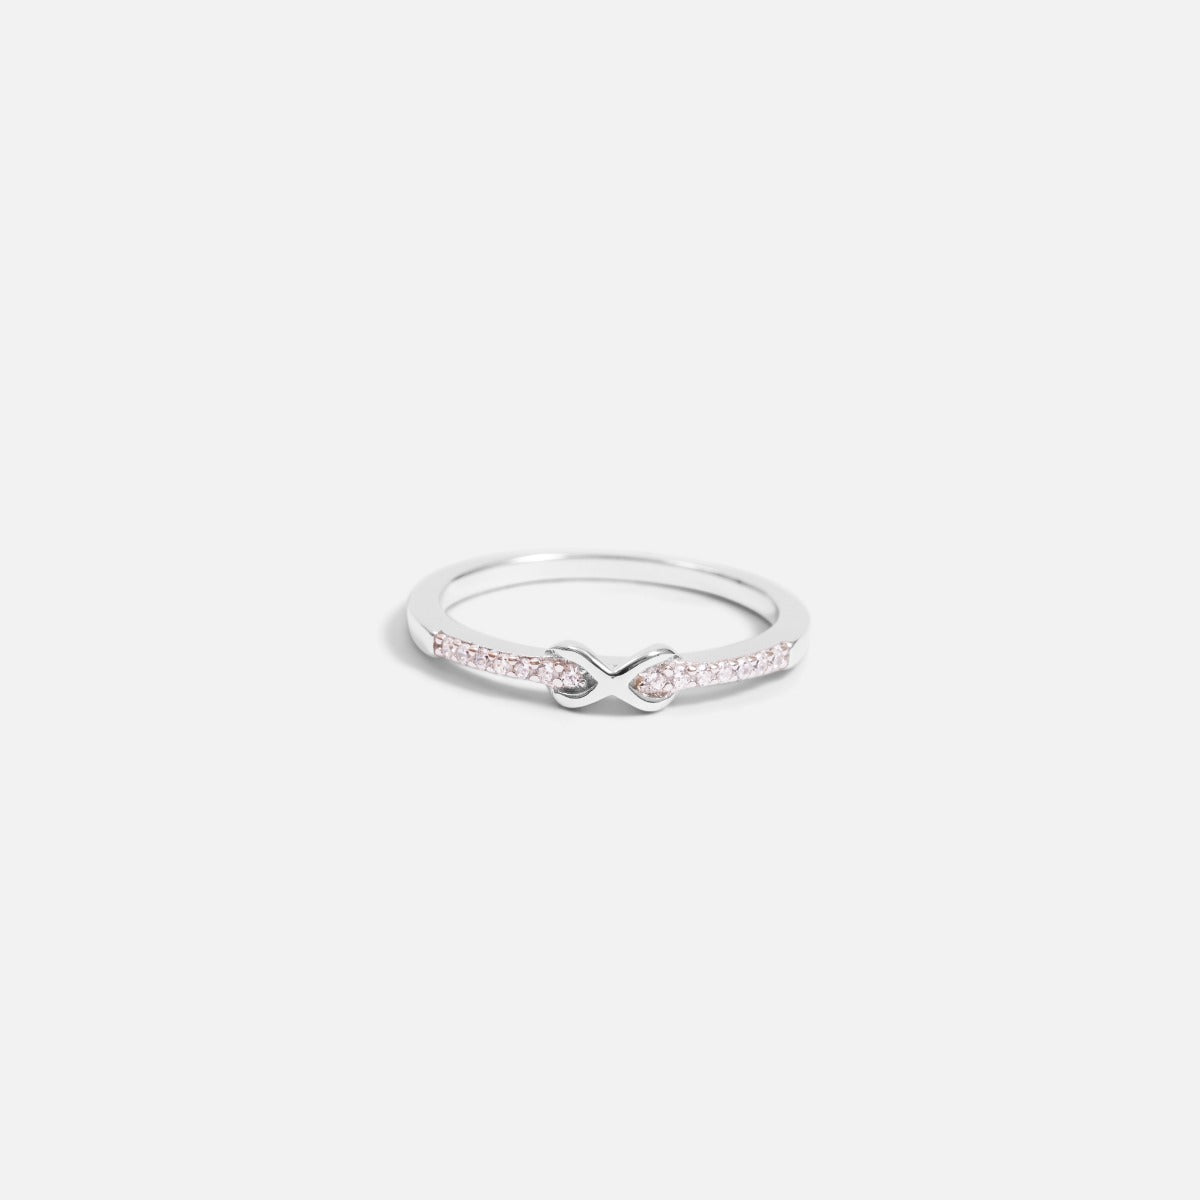 Sterling silver ring with cubic zirconia and little eternity sign